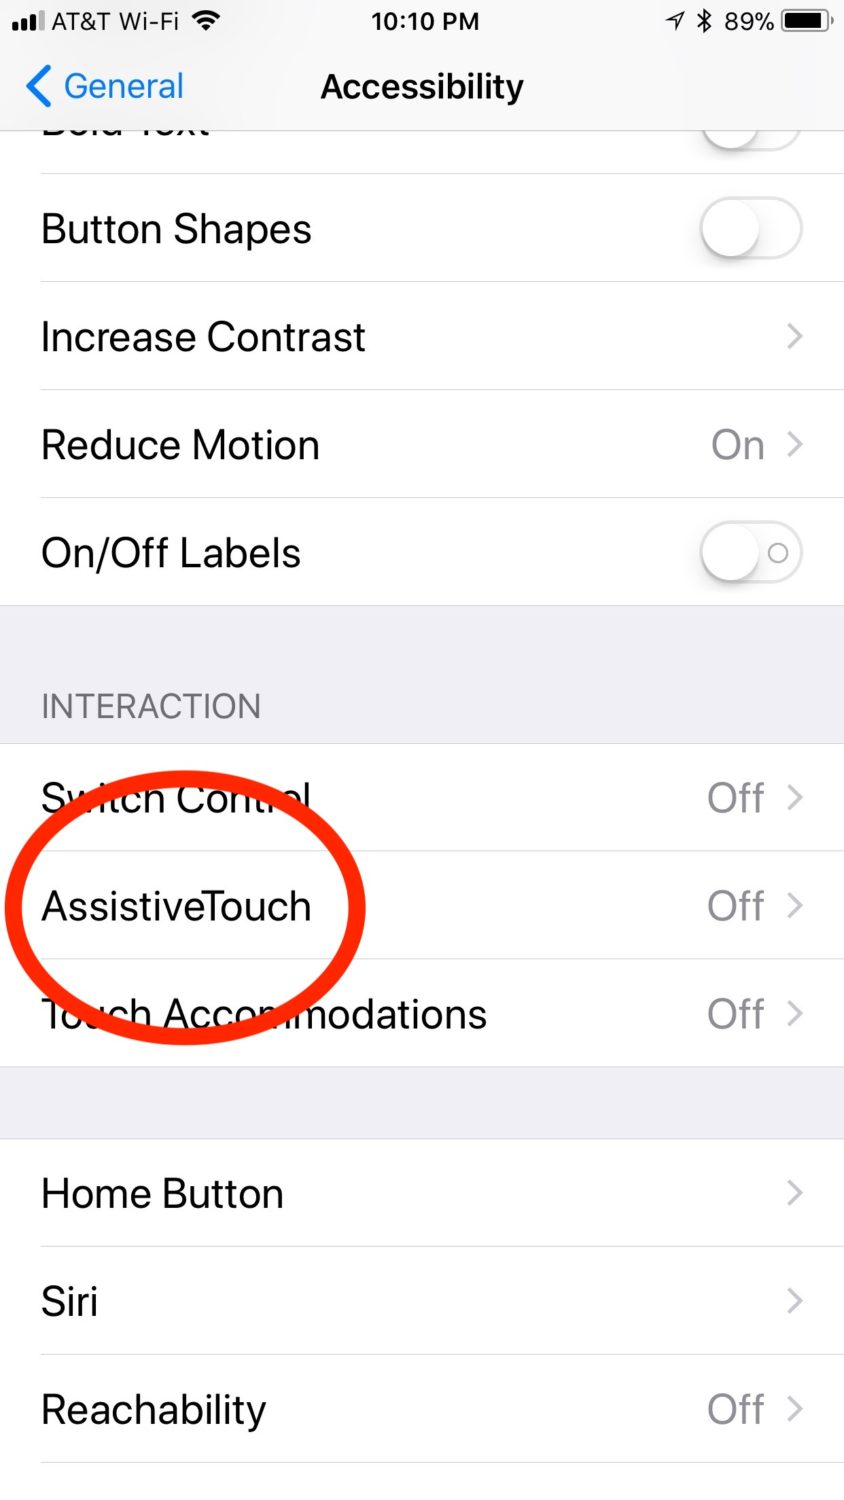 iPhone AssistiveTouch